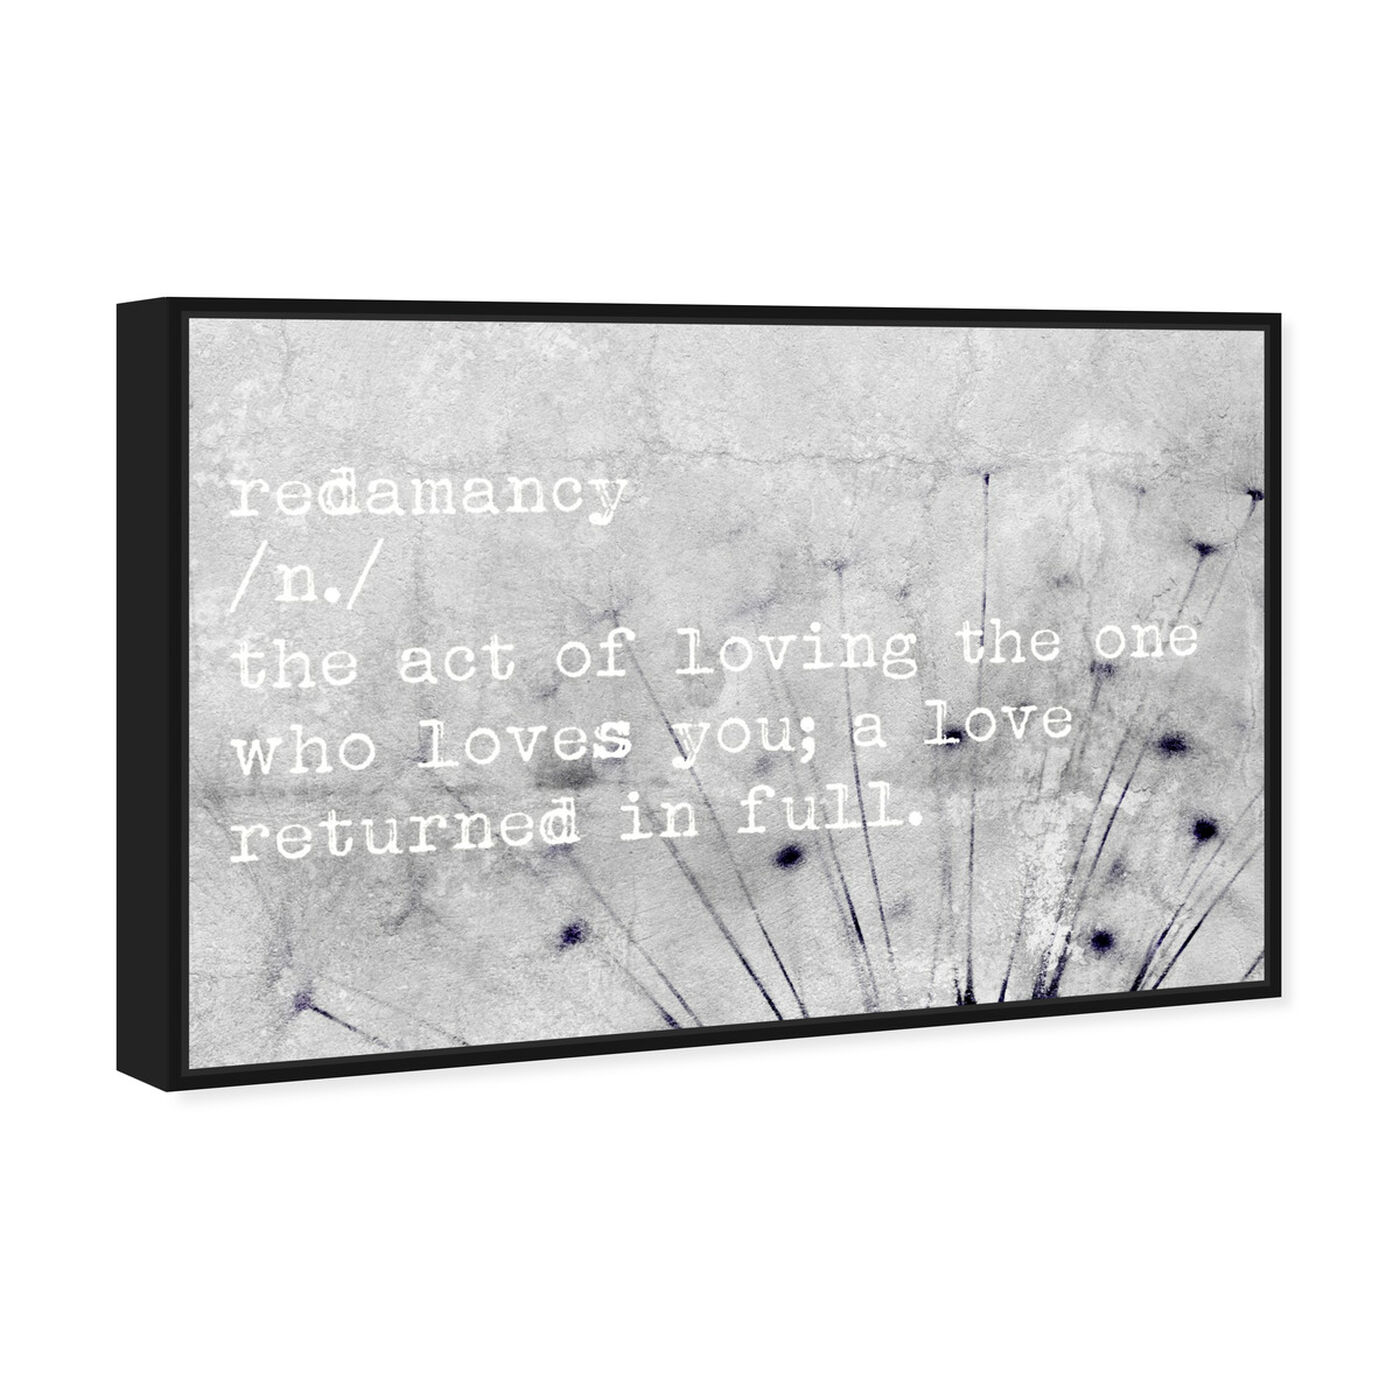 Angled view of Redamancy II featuring typography and quotes and love quotes and sayings art.